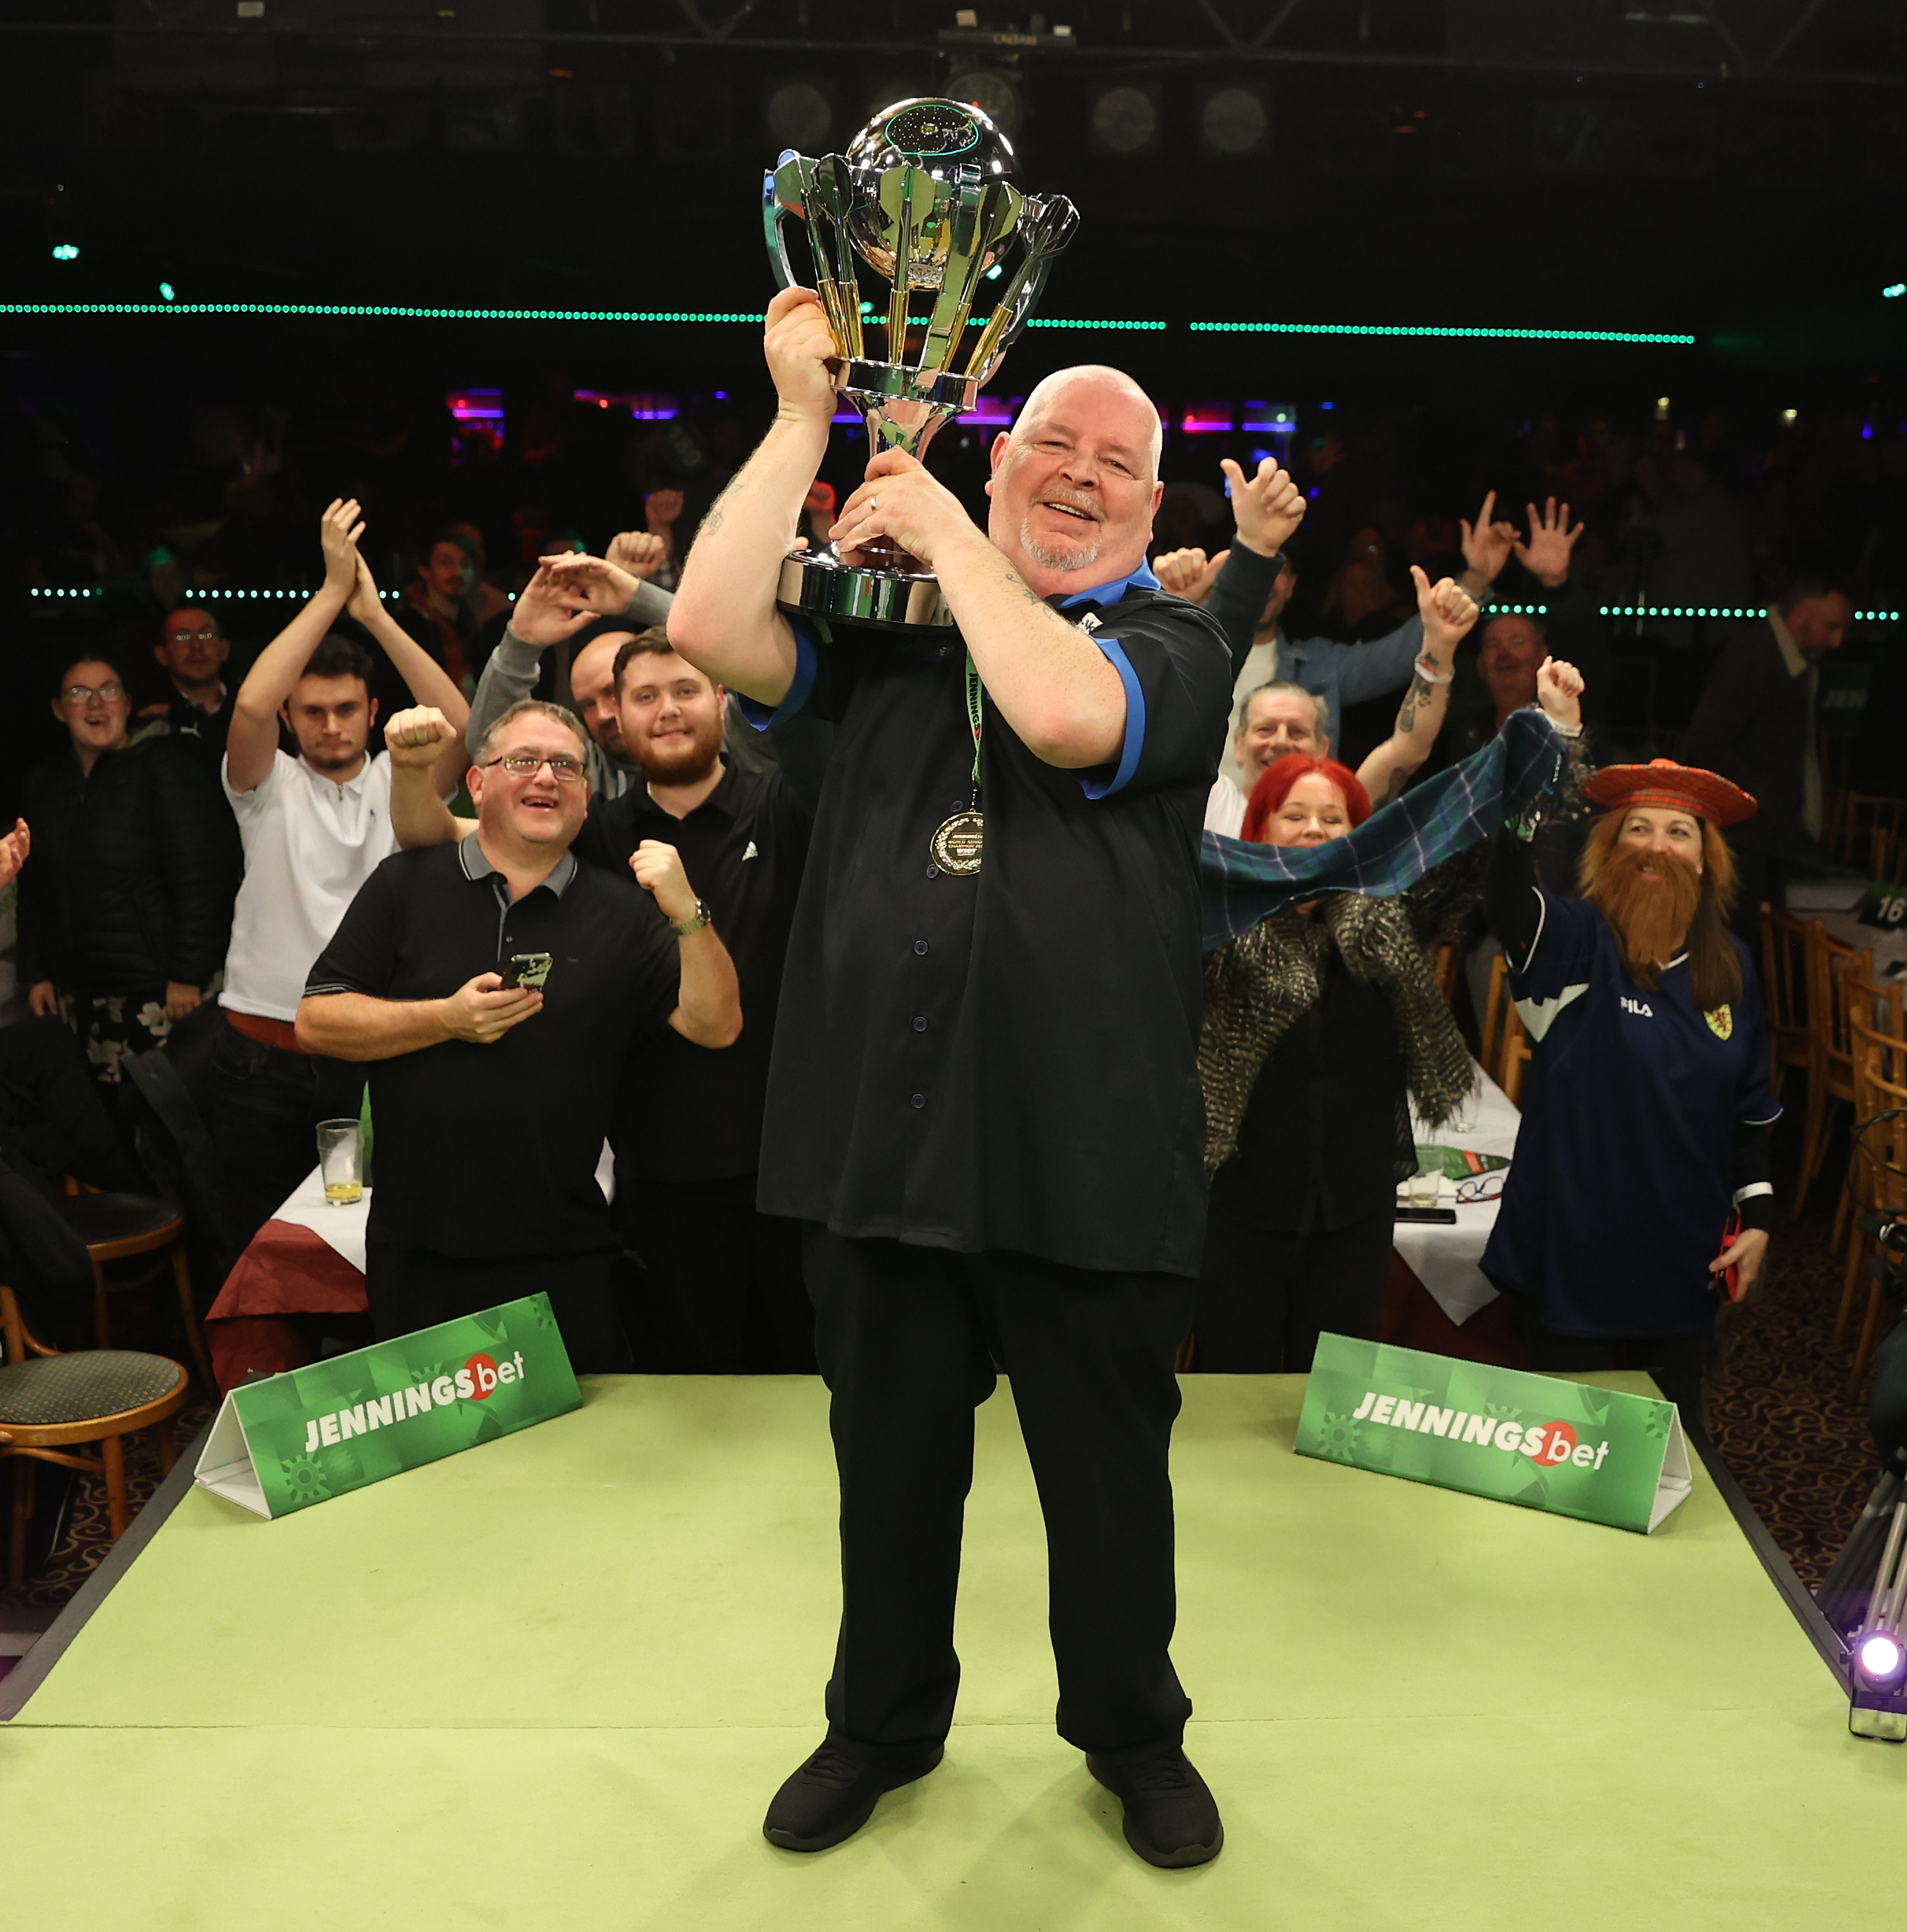 Robert Thornton lifting a trophy with cheering spectators behind